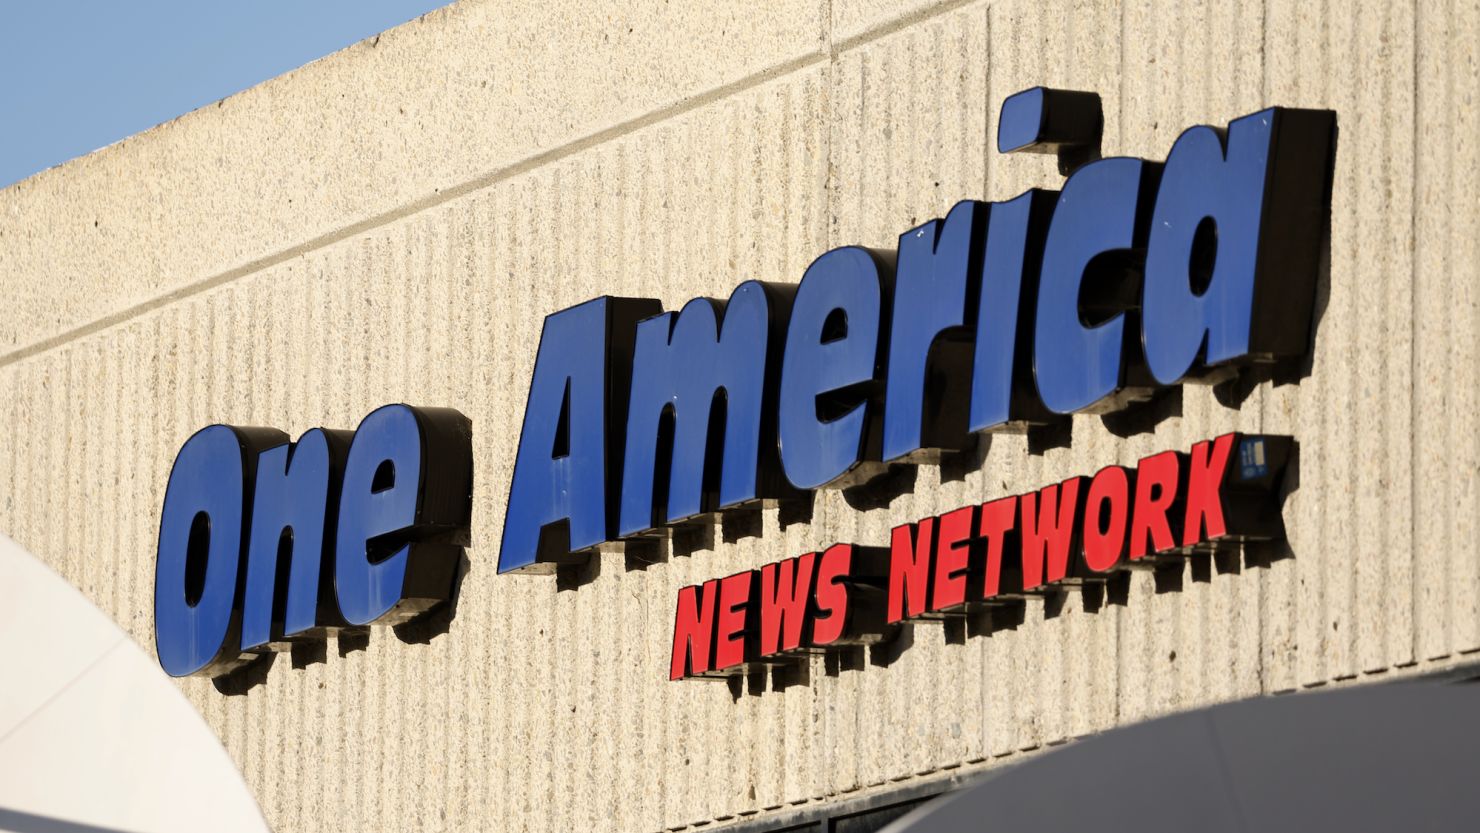 SAN DIEGO, CALIFORNIA - The One America News Network logo is displayed on the One America News Network headquarters on February 2, 2024 in San Diego, California. (Photo by Kevin Carter/Getty Images)